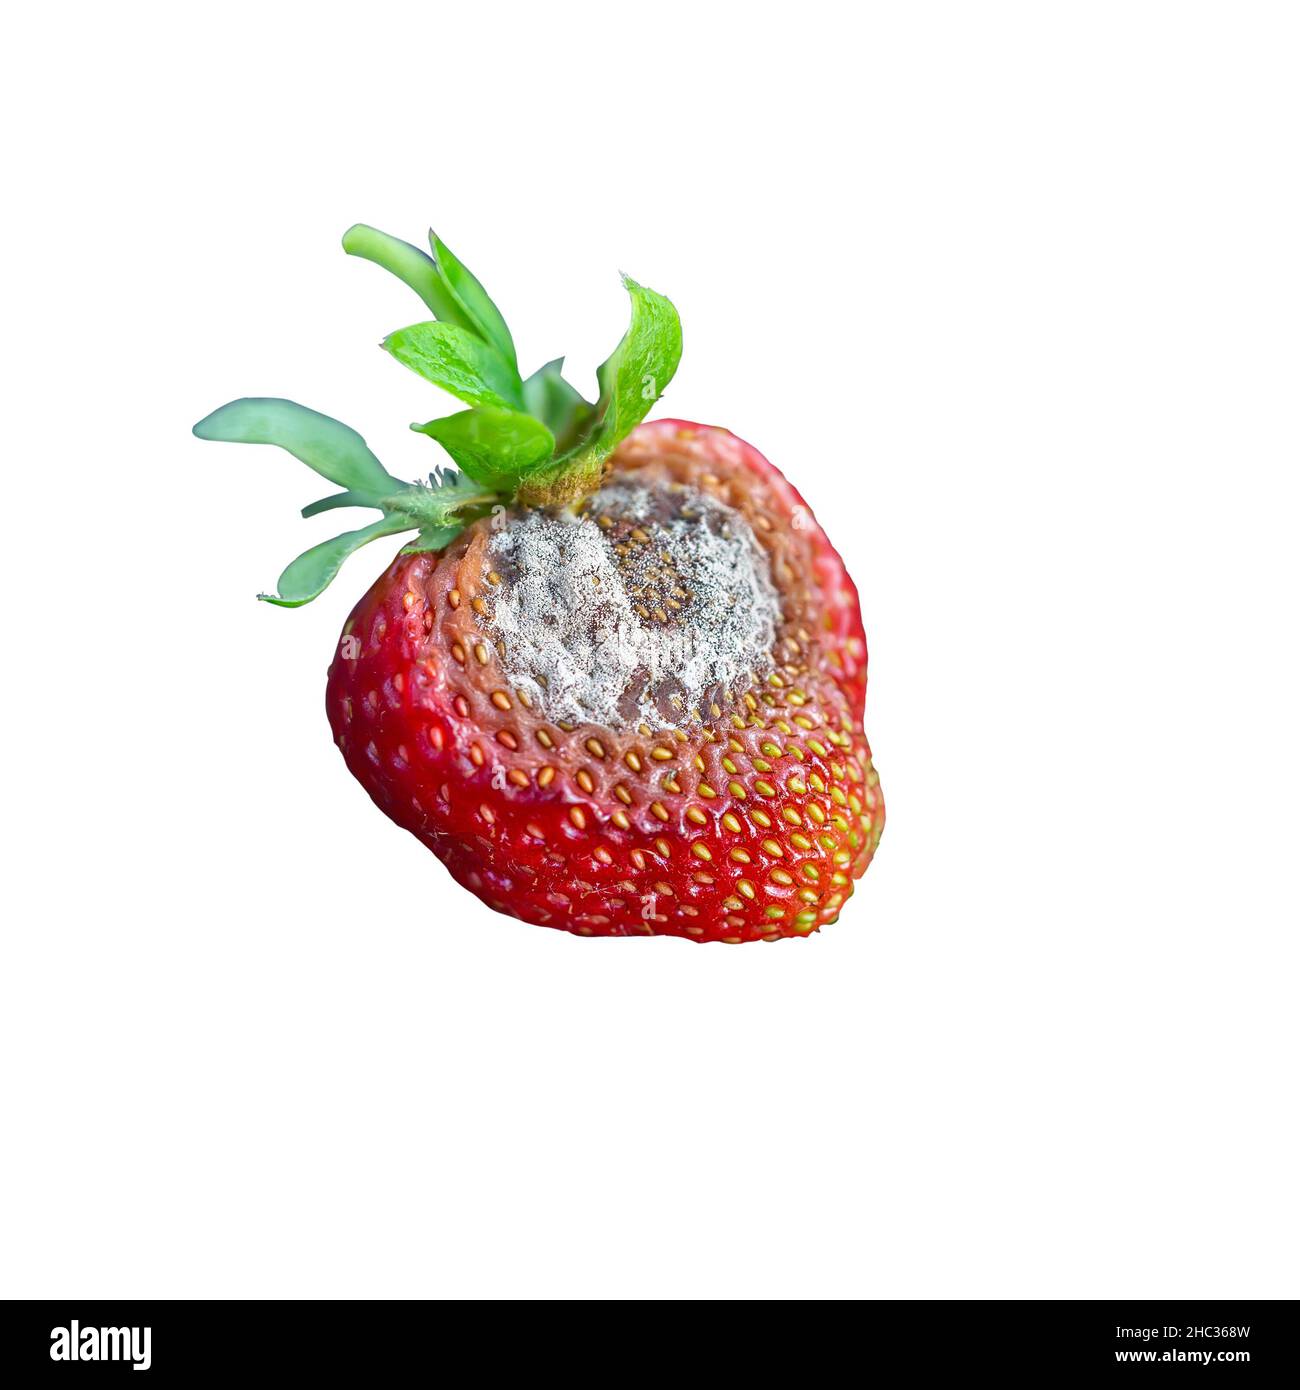 Strawberry berry with rot. rotten fruit. Fungal diseases of fruits and other products. Isolated on a white background. Stock Photo